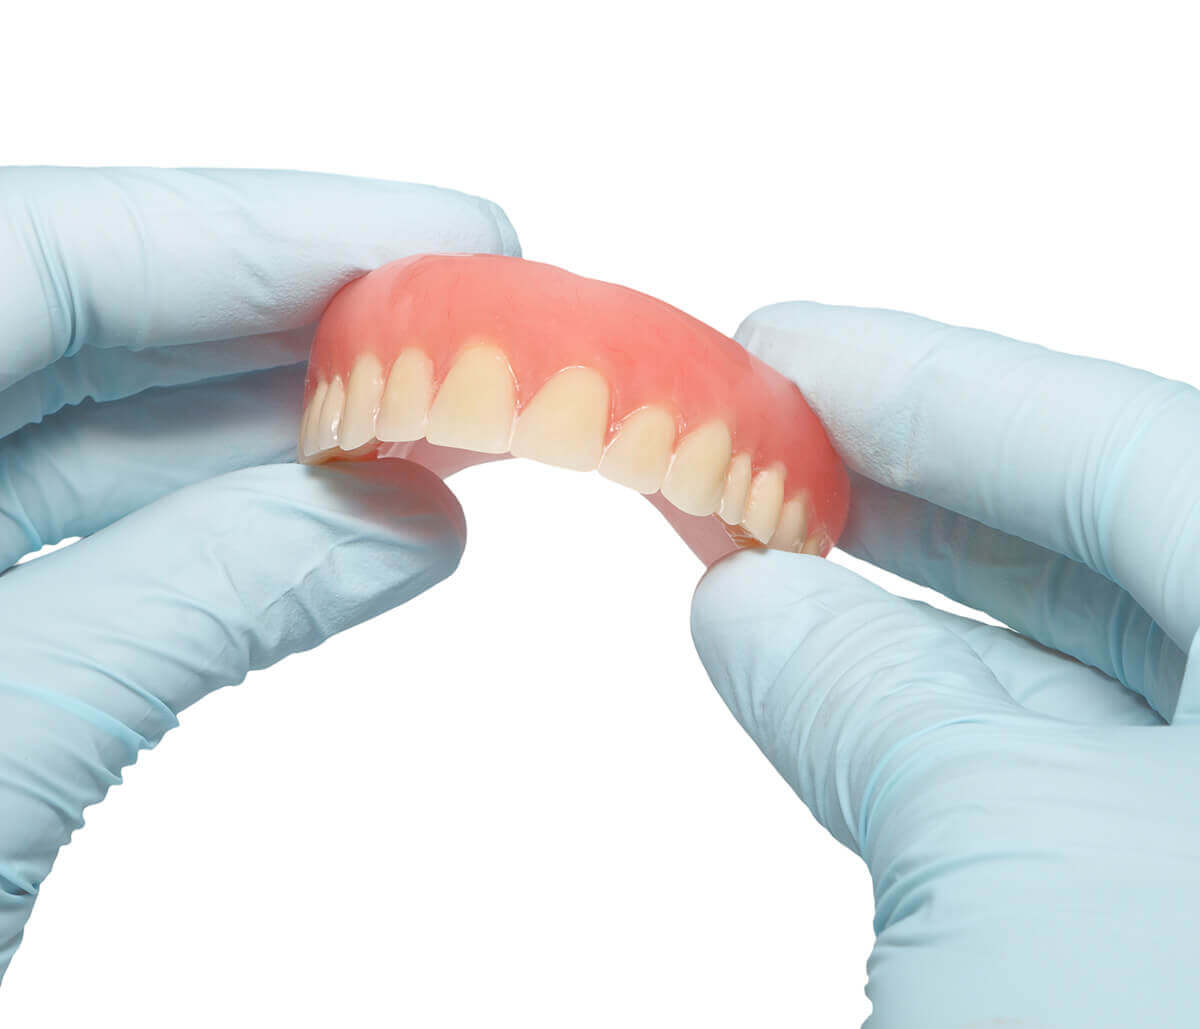 High Quality Dentures Under Restorative Dentistry Services in Houston Tx Area